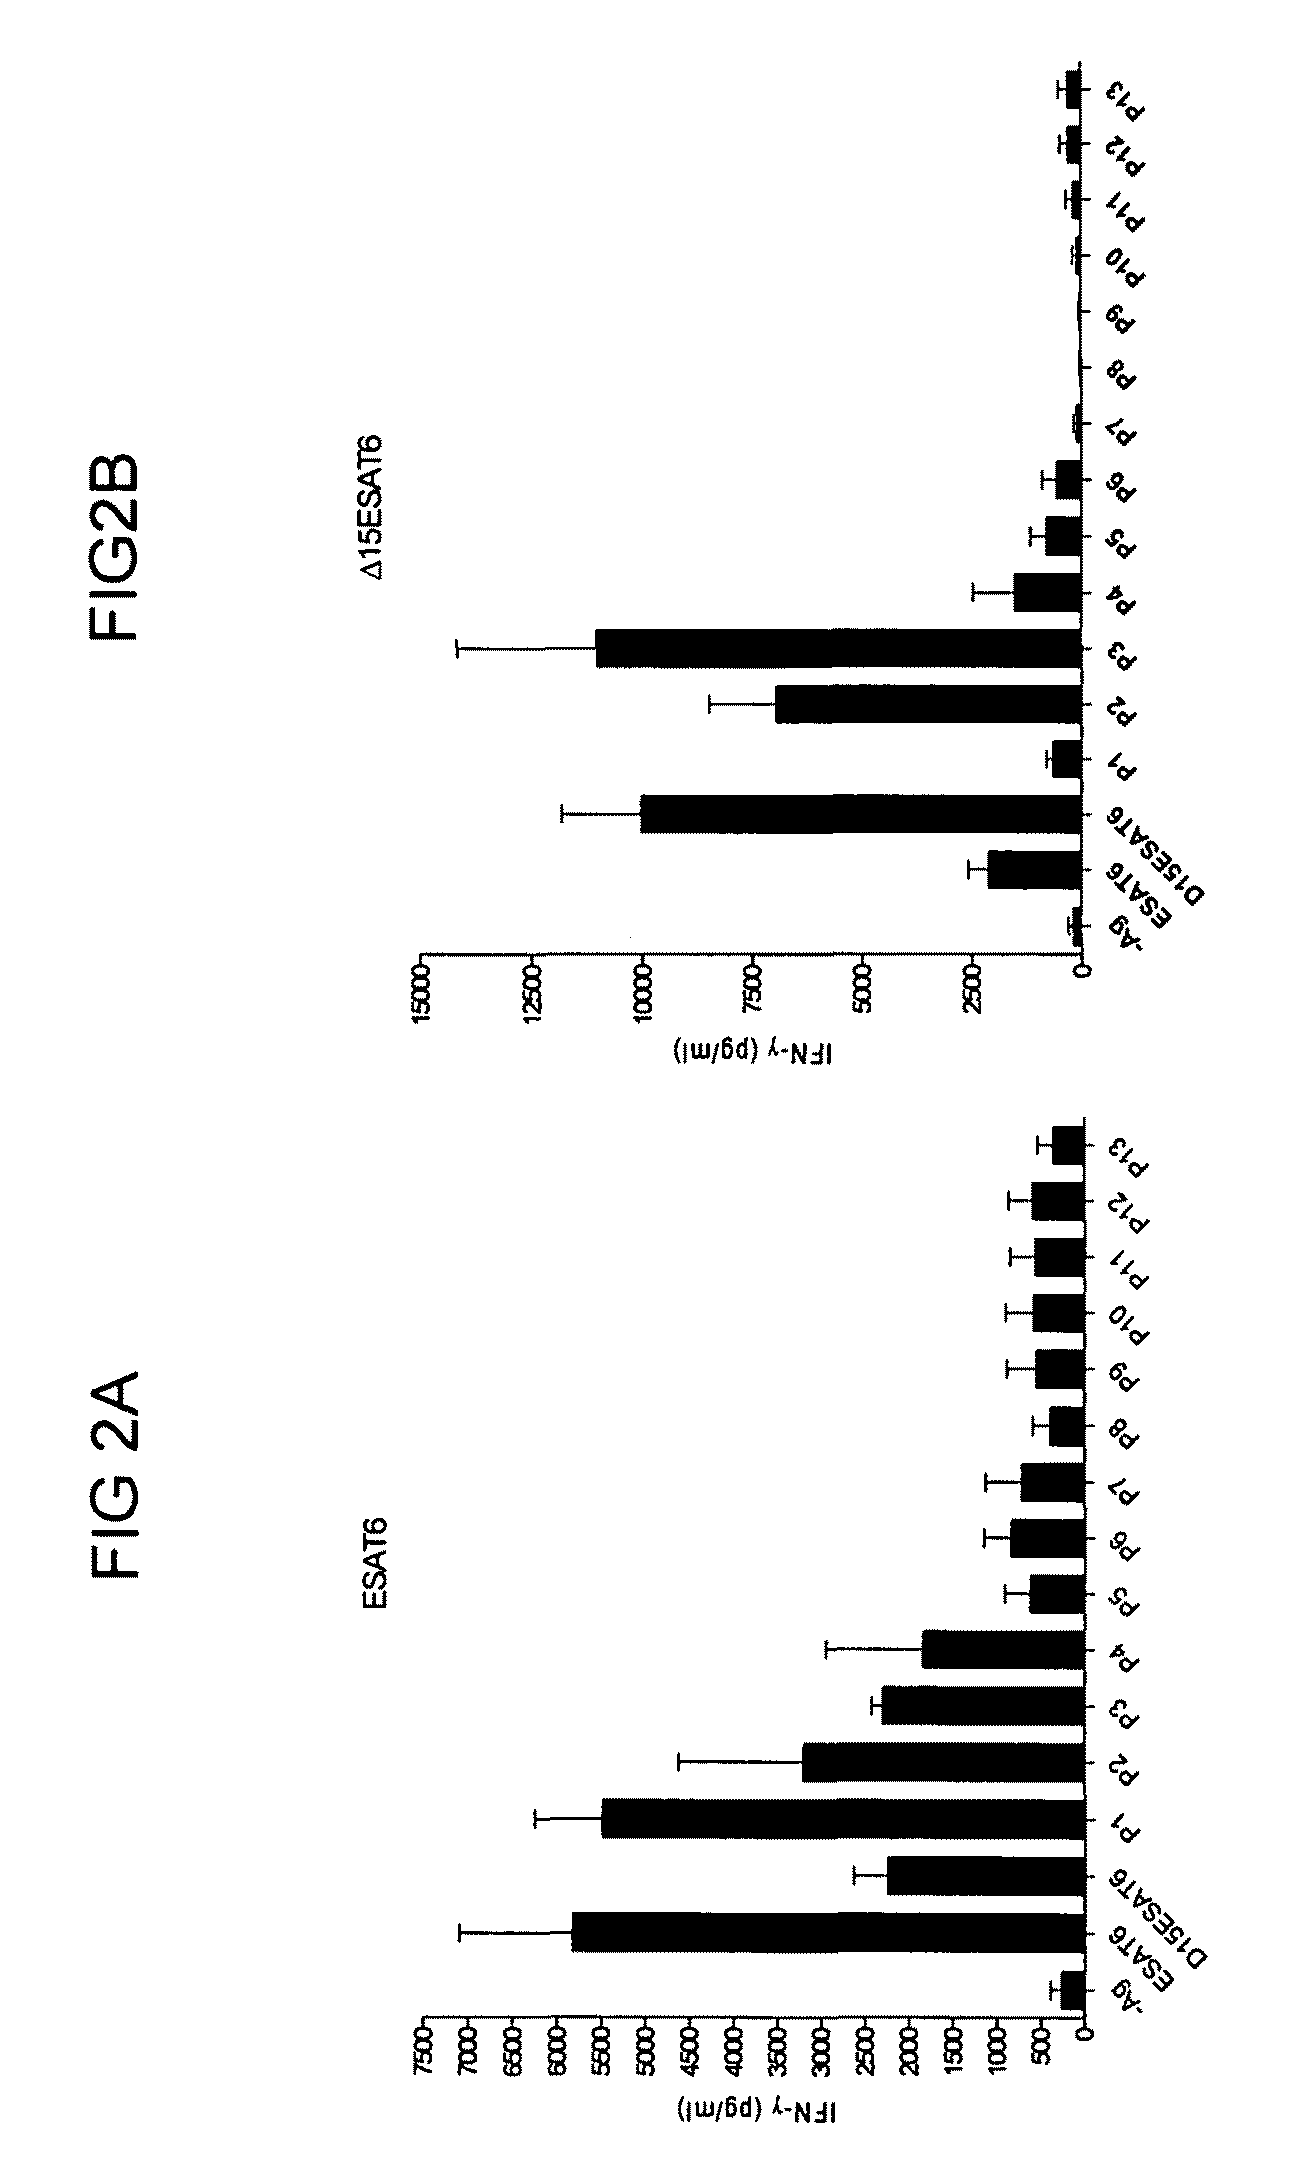 Expanding the T cell repertoire to include subdominant epitopes by vaccination with antigens delivered as protein fragments or peptide cocktails